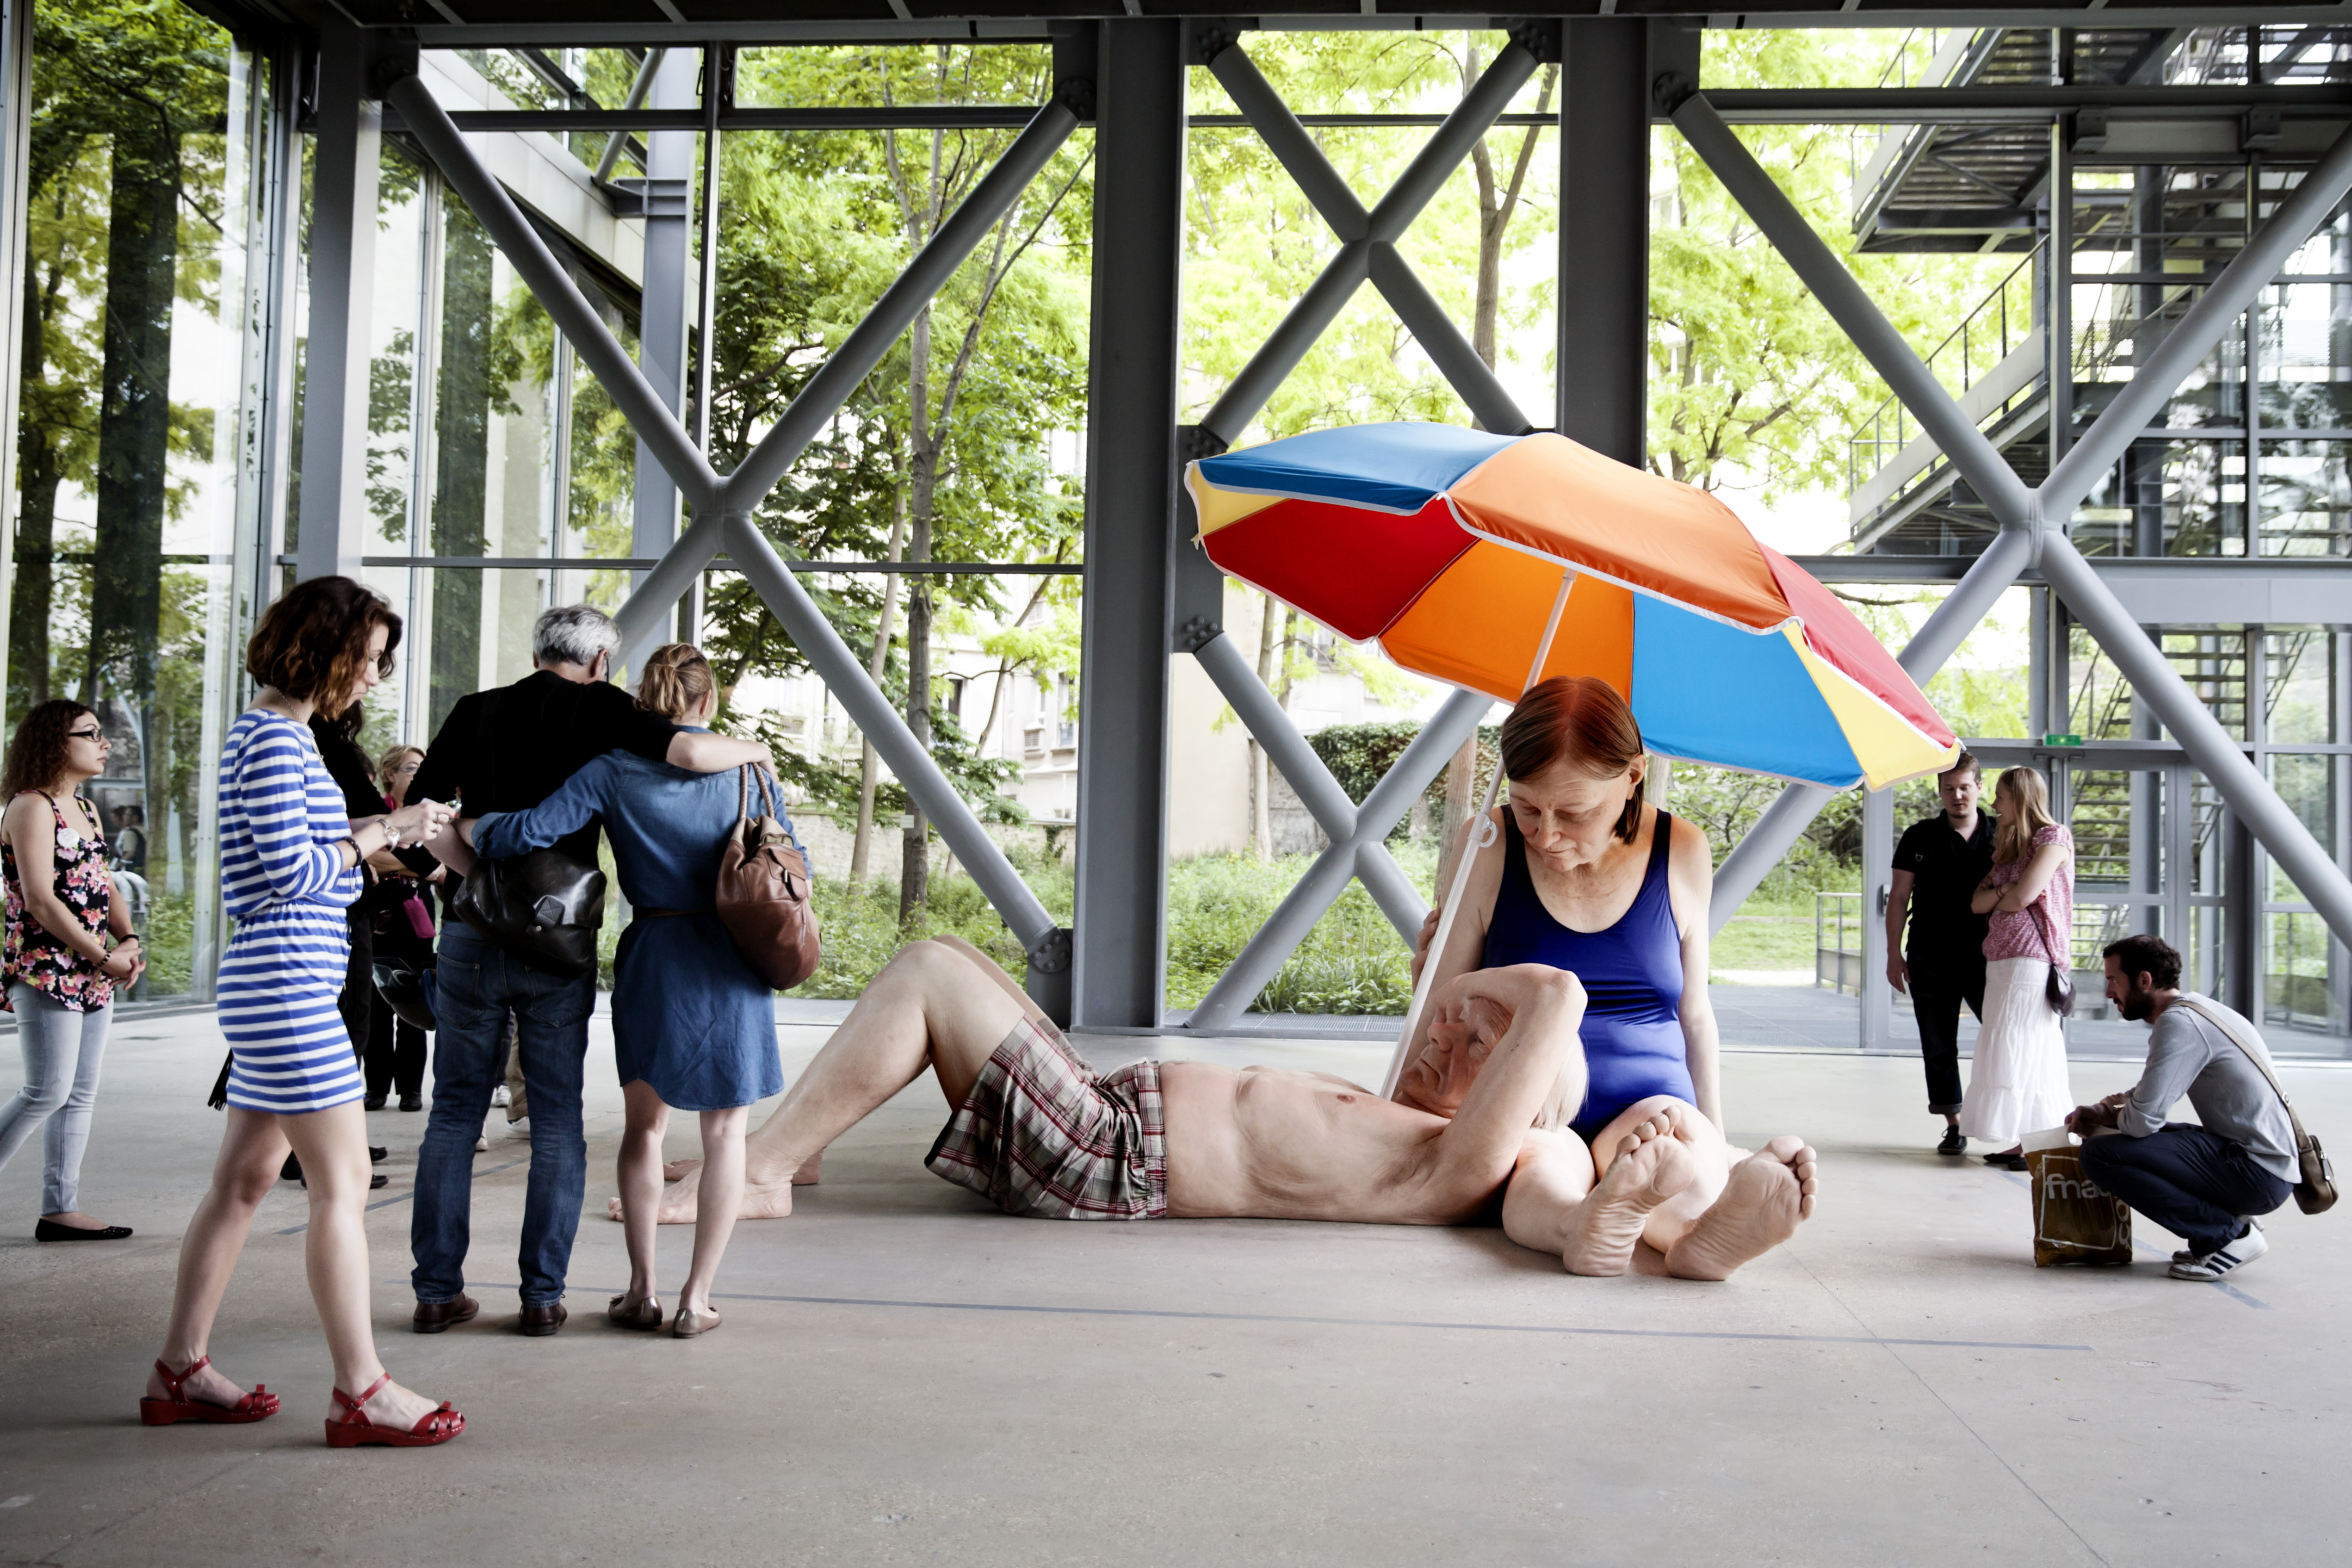 Ron Mueck, Couple Under an umbrella, 2013 Courtesy Hauser & Wirth/Anthony d'Offay, Loondres